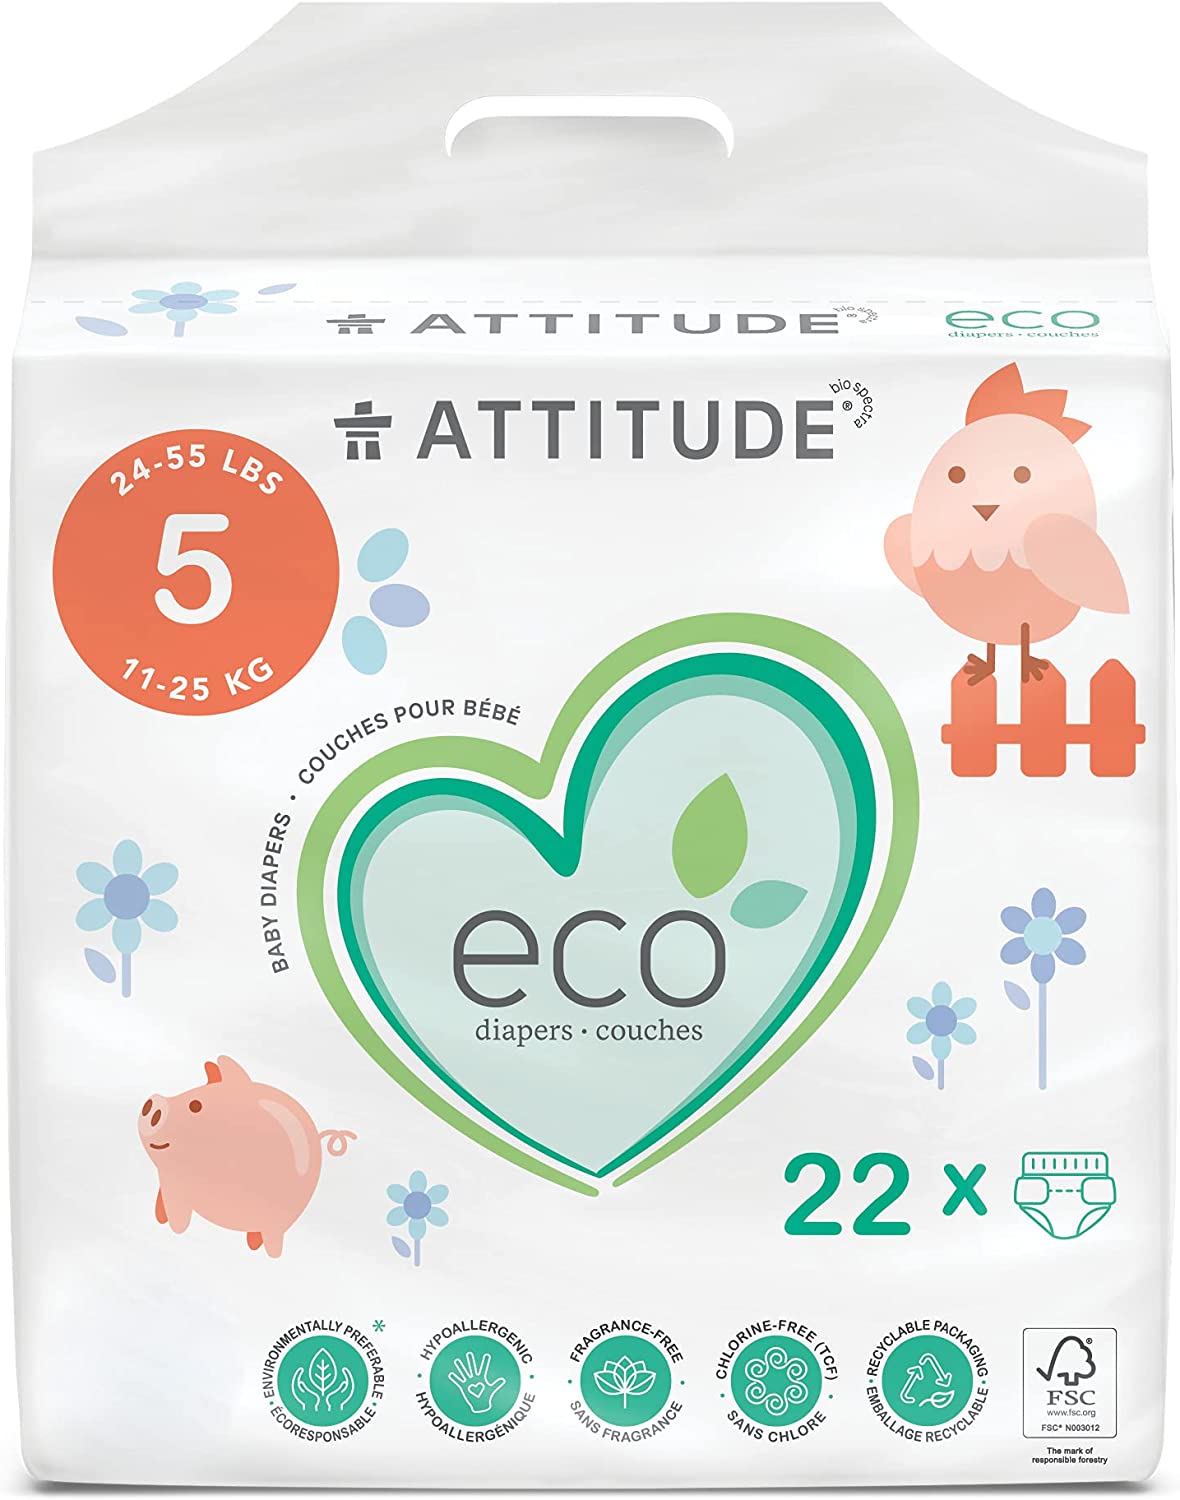 ATTITUDE Disposable Diapers for Sensitive Skin, Hypoallergenic, Chlorine-Free, Dye-Free & Lotion-Free Biodegradable Baby Diapers, Plain White (Unprinted), Size 5 (24-55 lbs), 22 Count